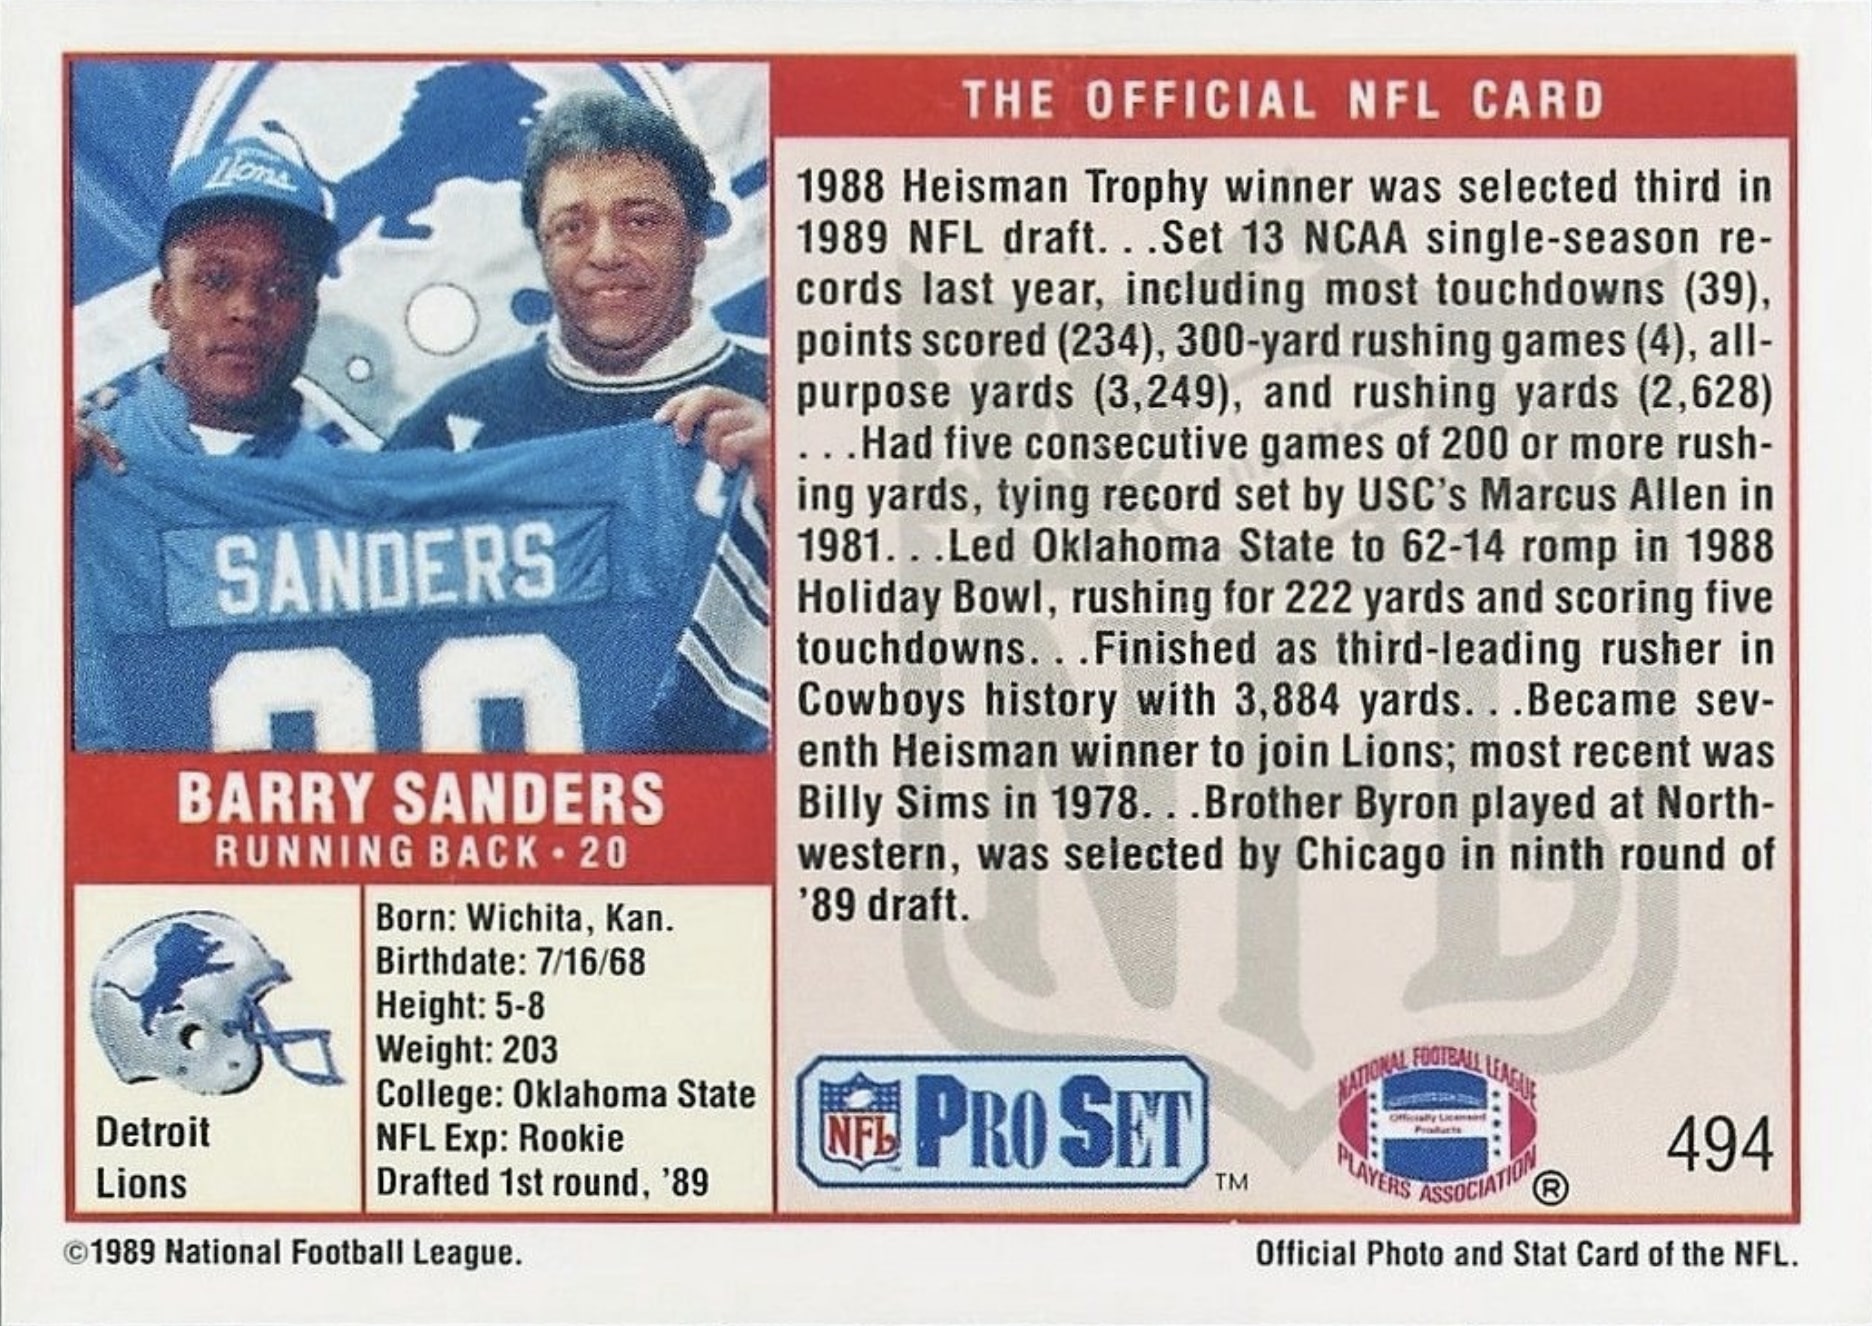 1989 Pro Set #494 Barry Sanders Football Card Reverse Side With Stats And Biography